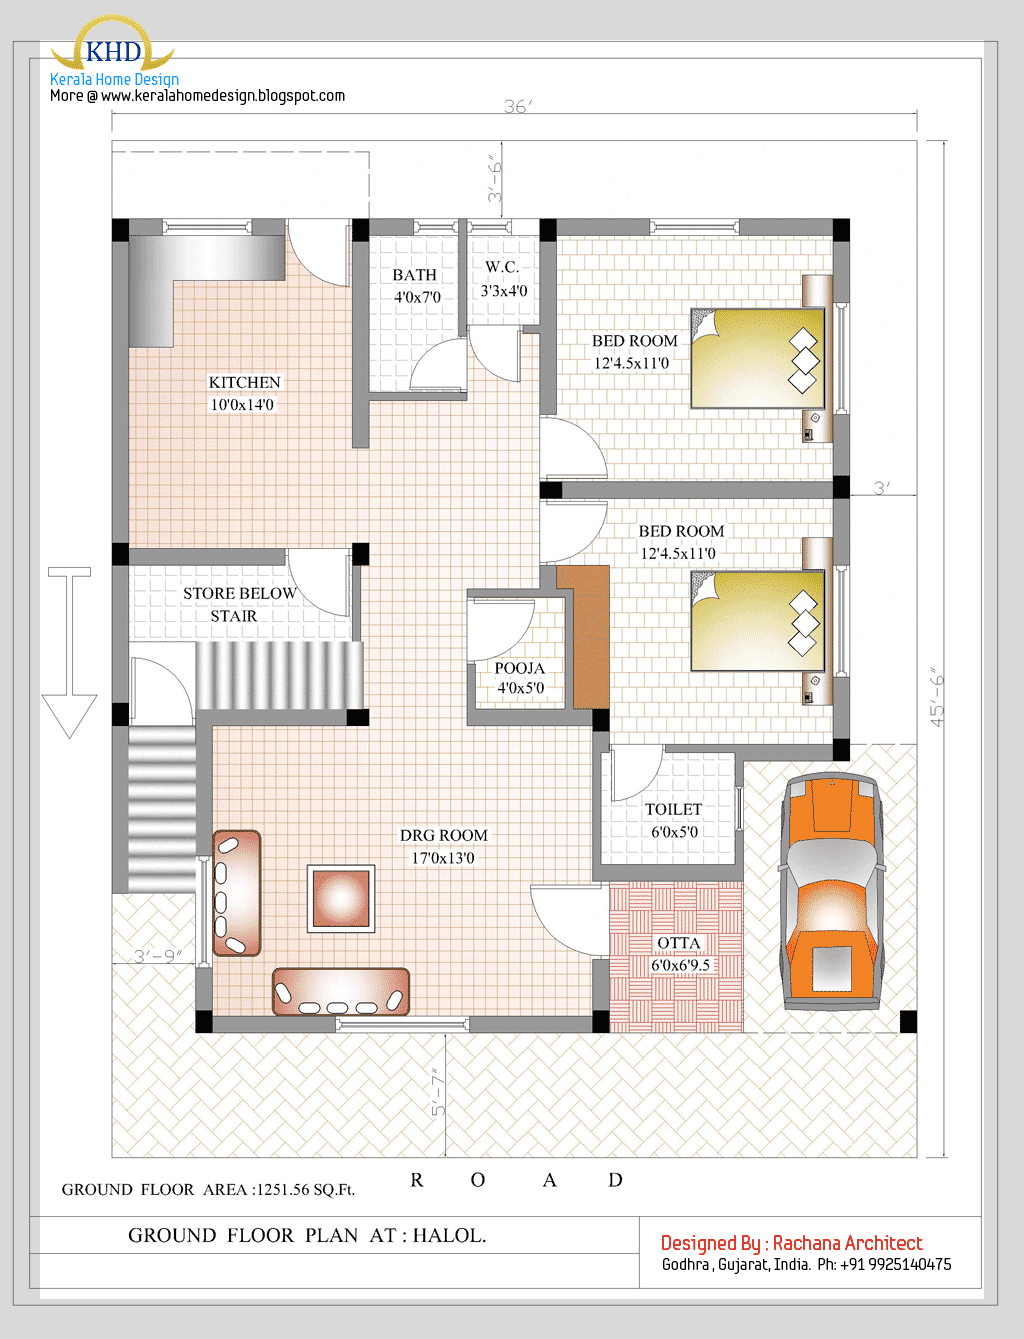 Duplex House Plan and Elevation 2349 Sq. Ft. Kerala